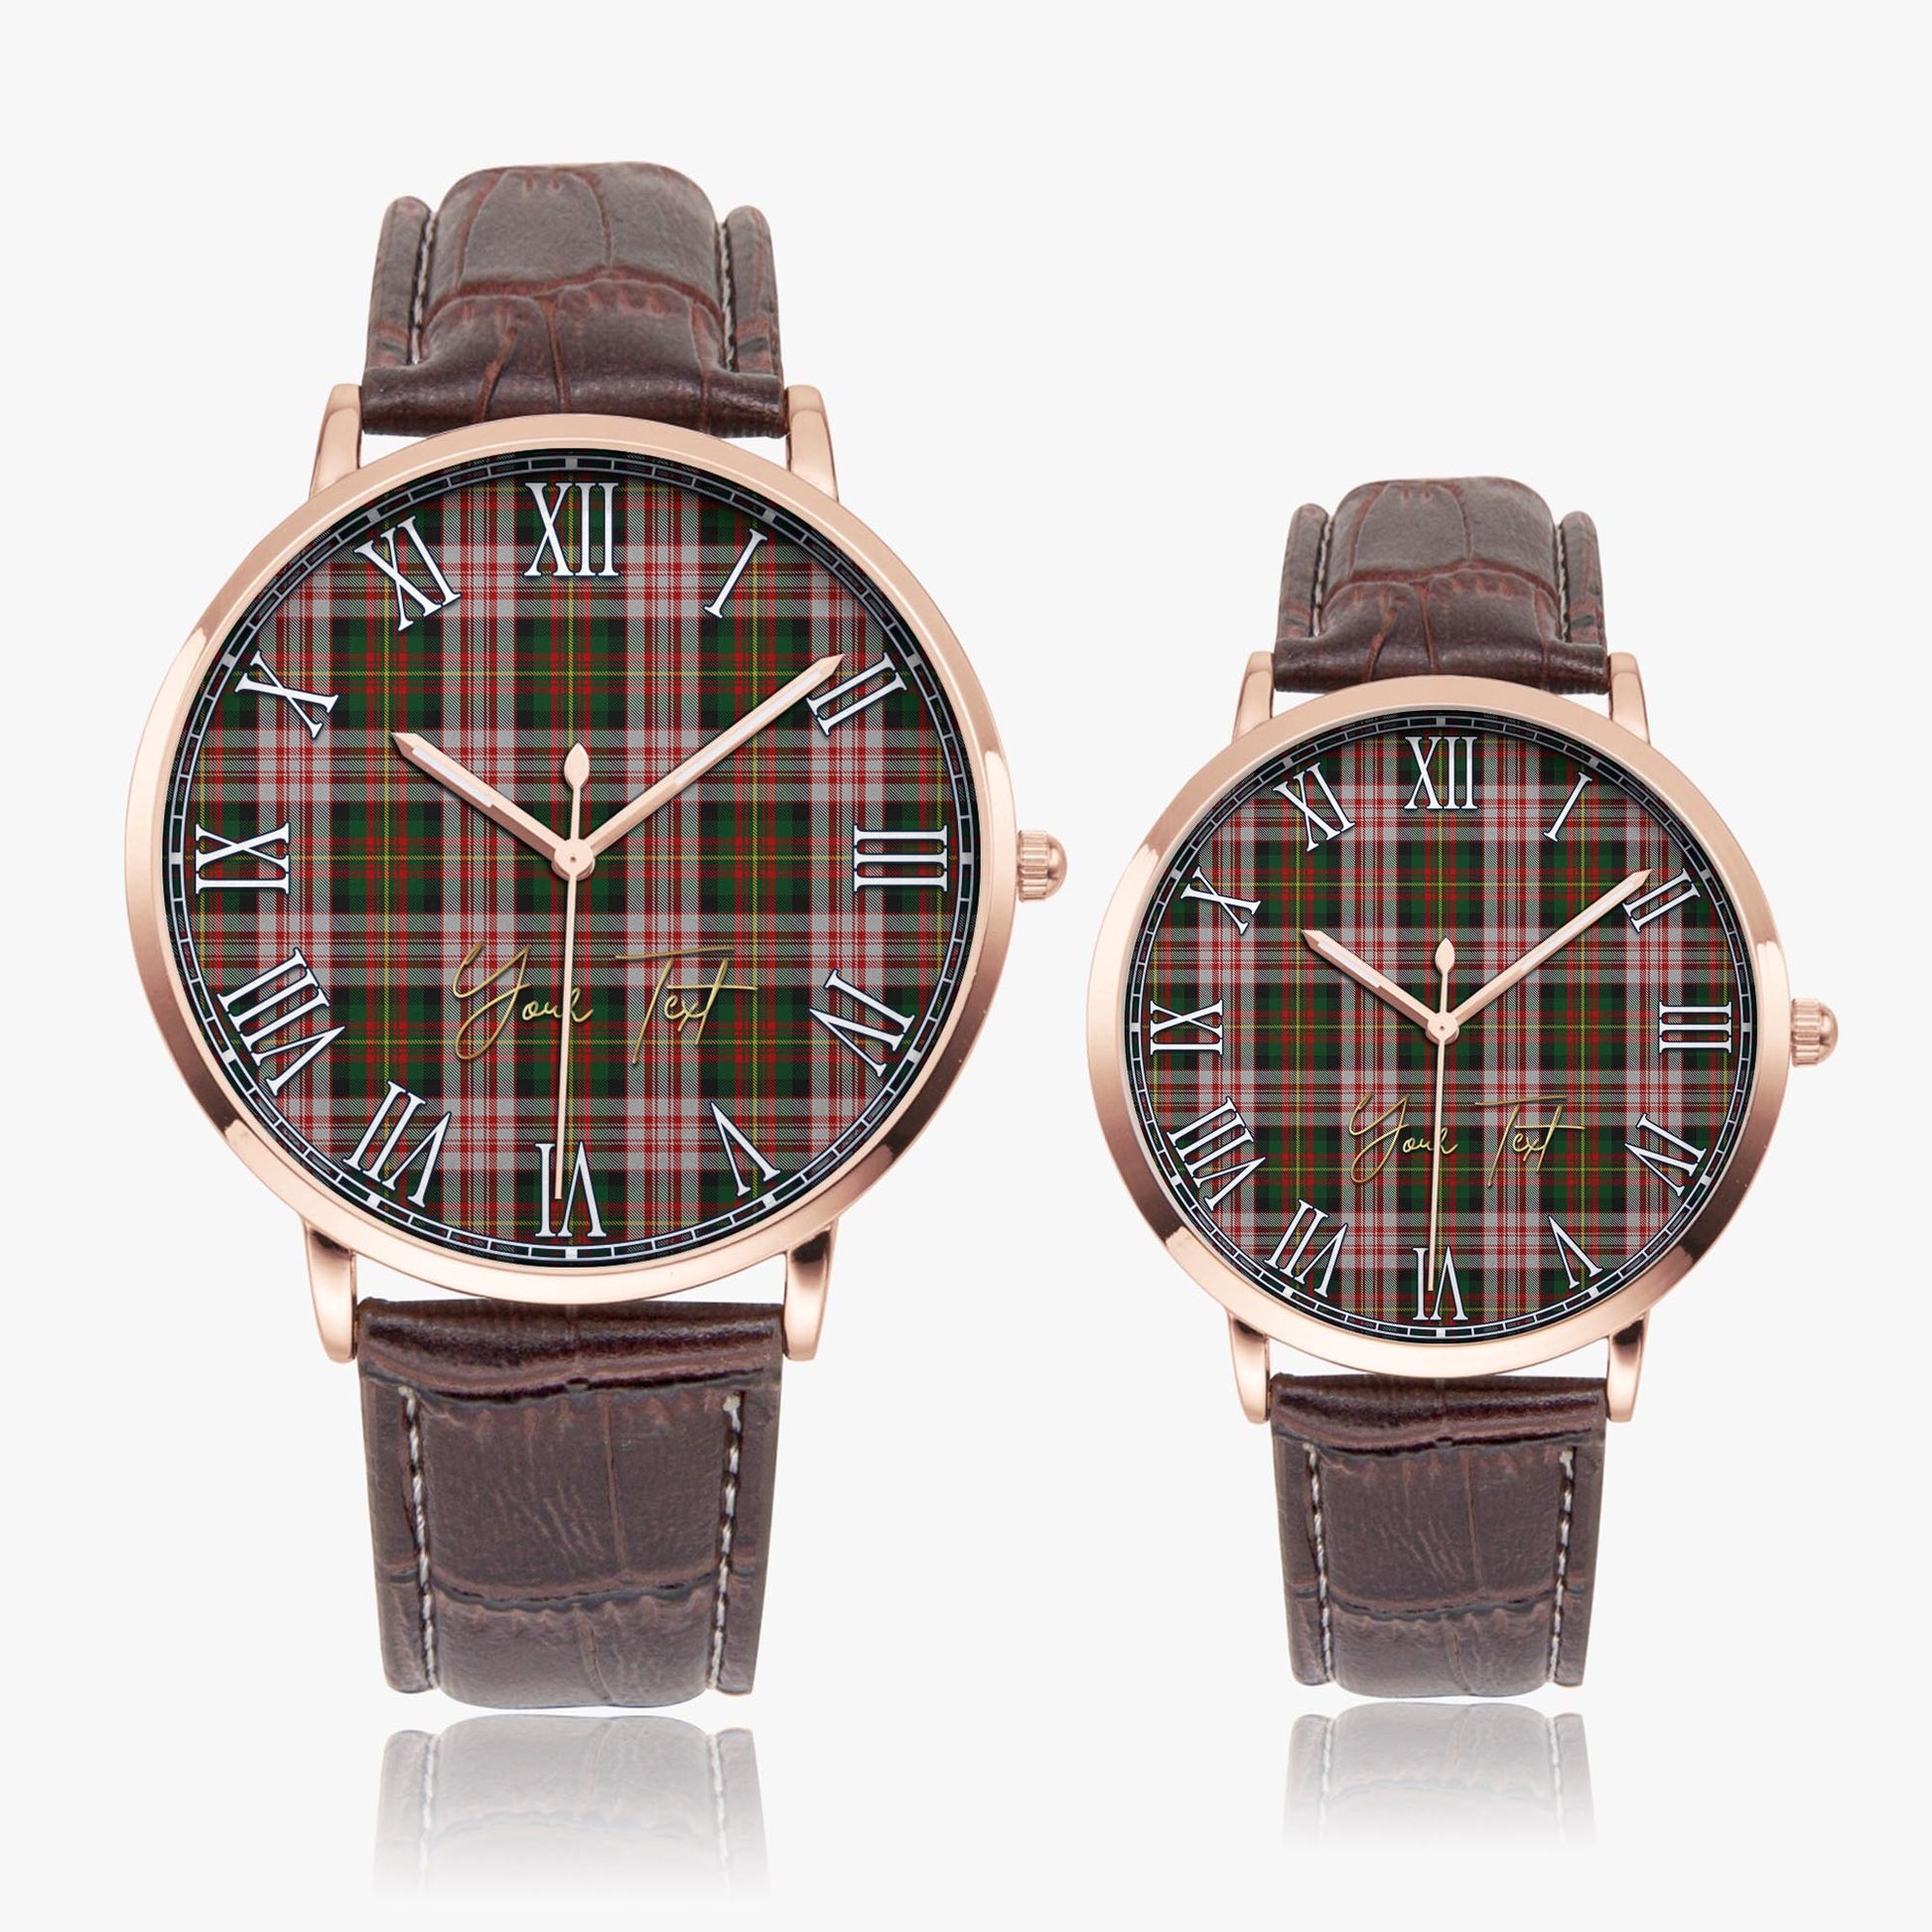 Carnegie Dress Tartan Personalized Your Text Leather Trap Quartz Watch Ultra Thin Rose Gold Case With Brown Leather Strap - Tartanvibesclothing